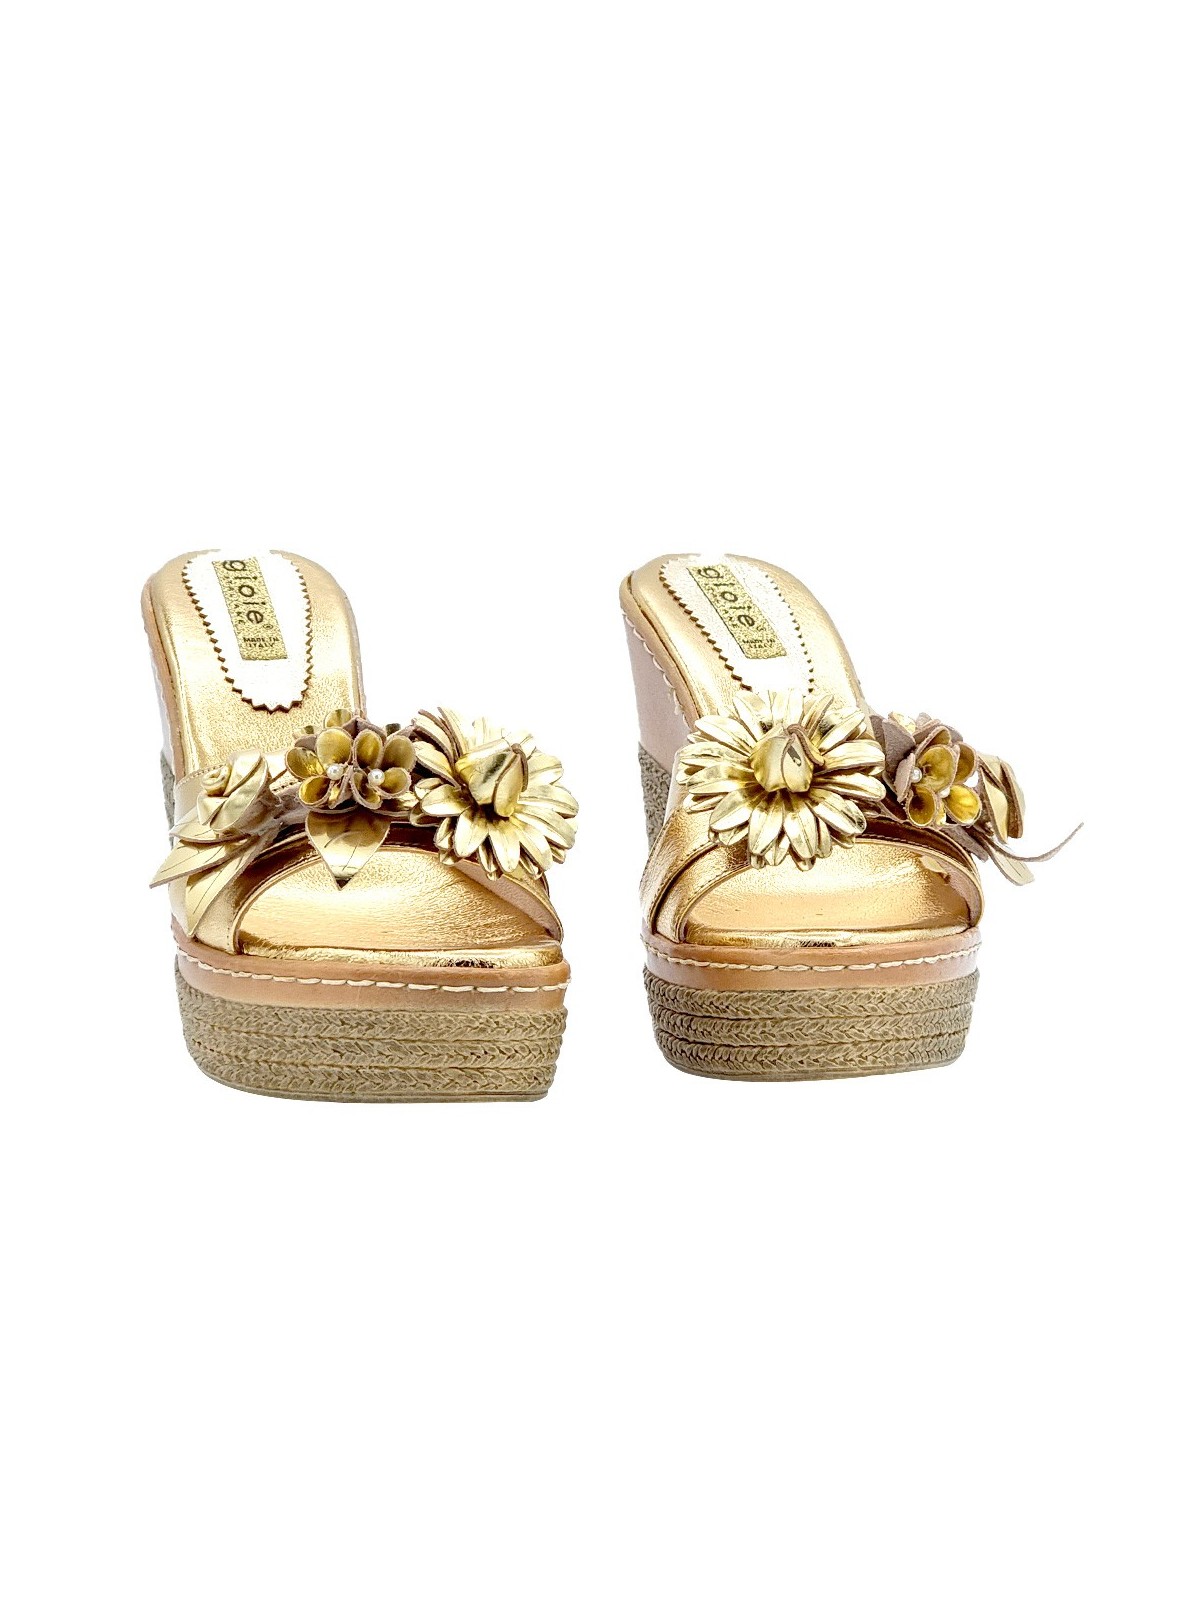 GOLDEN WEDGE SANDALS WITH FLOWER JEWEL ACCESSORY